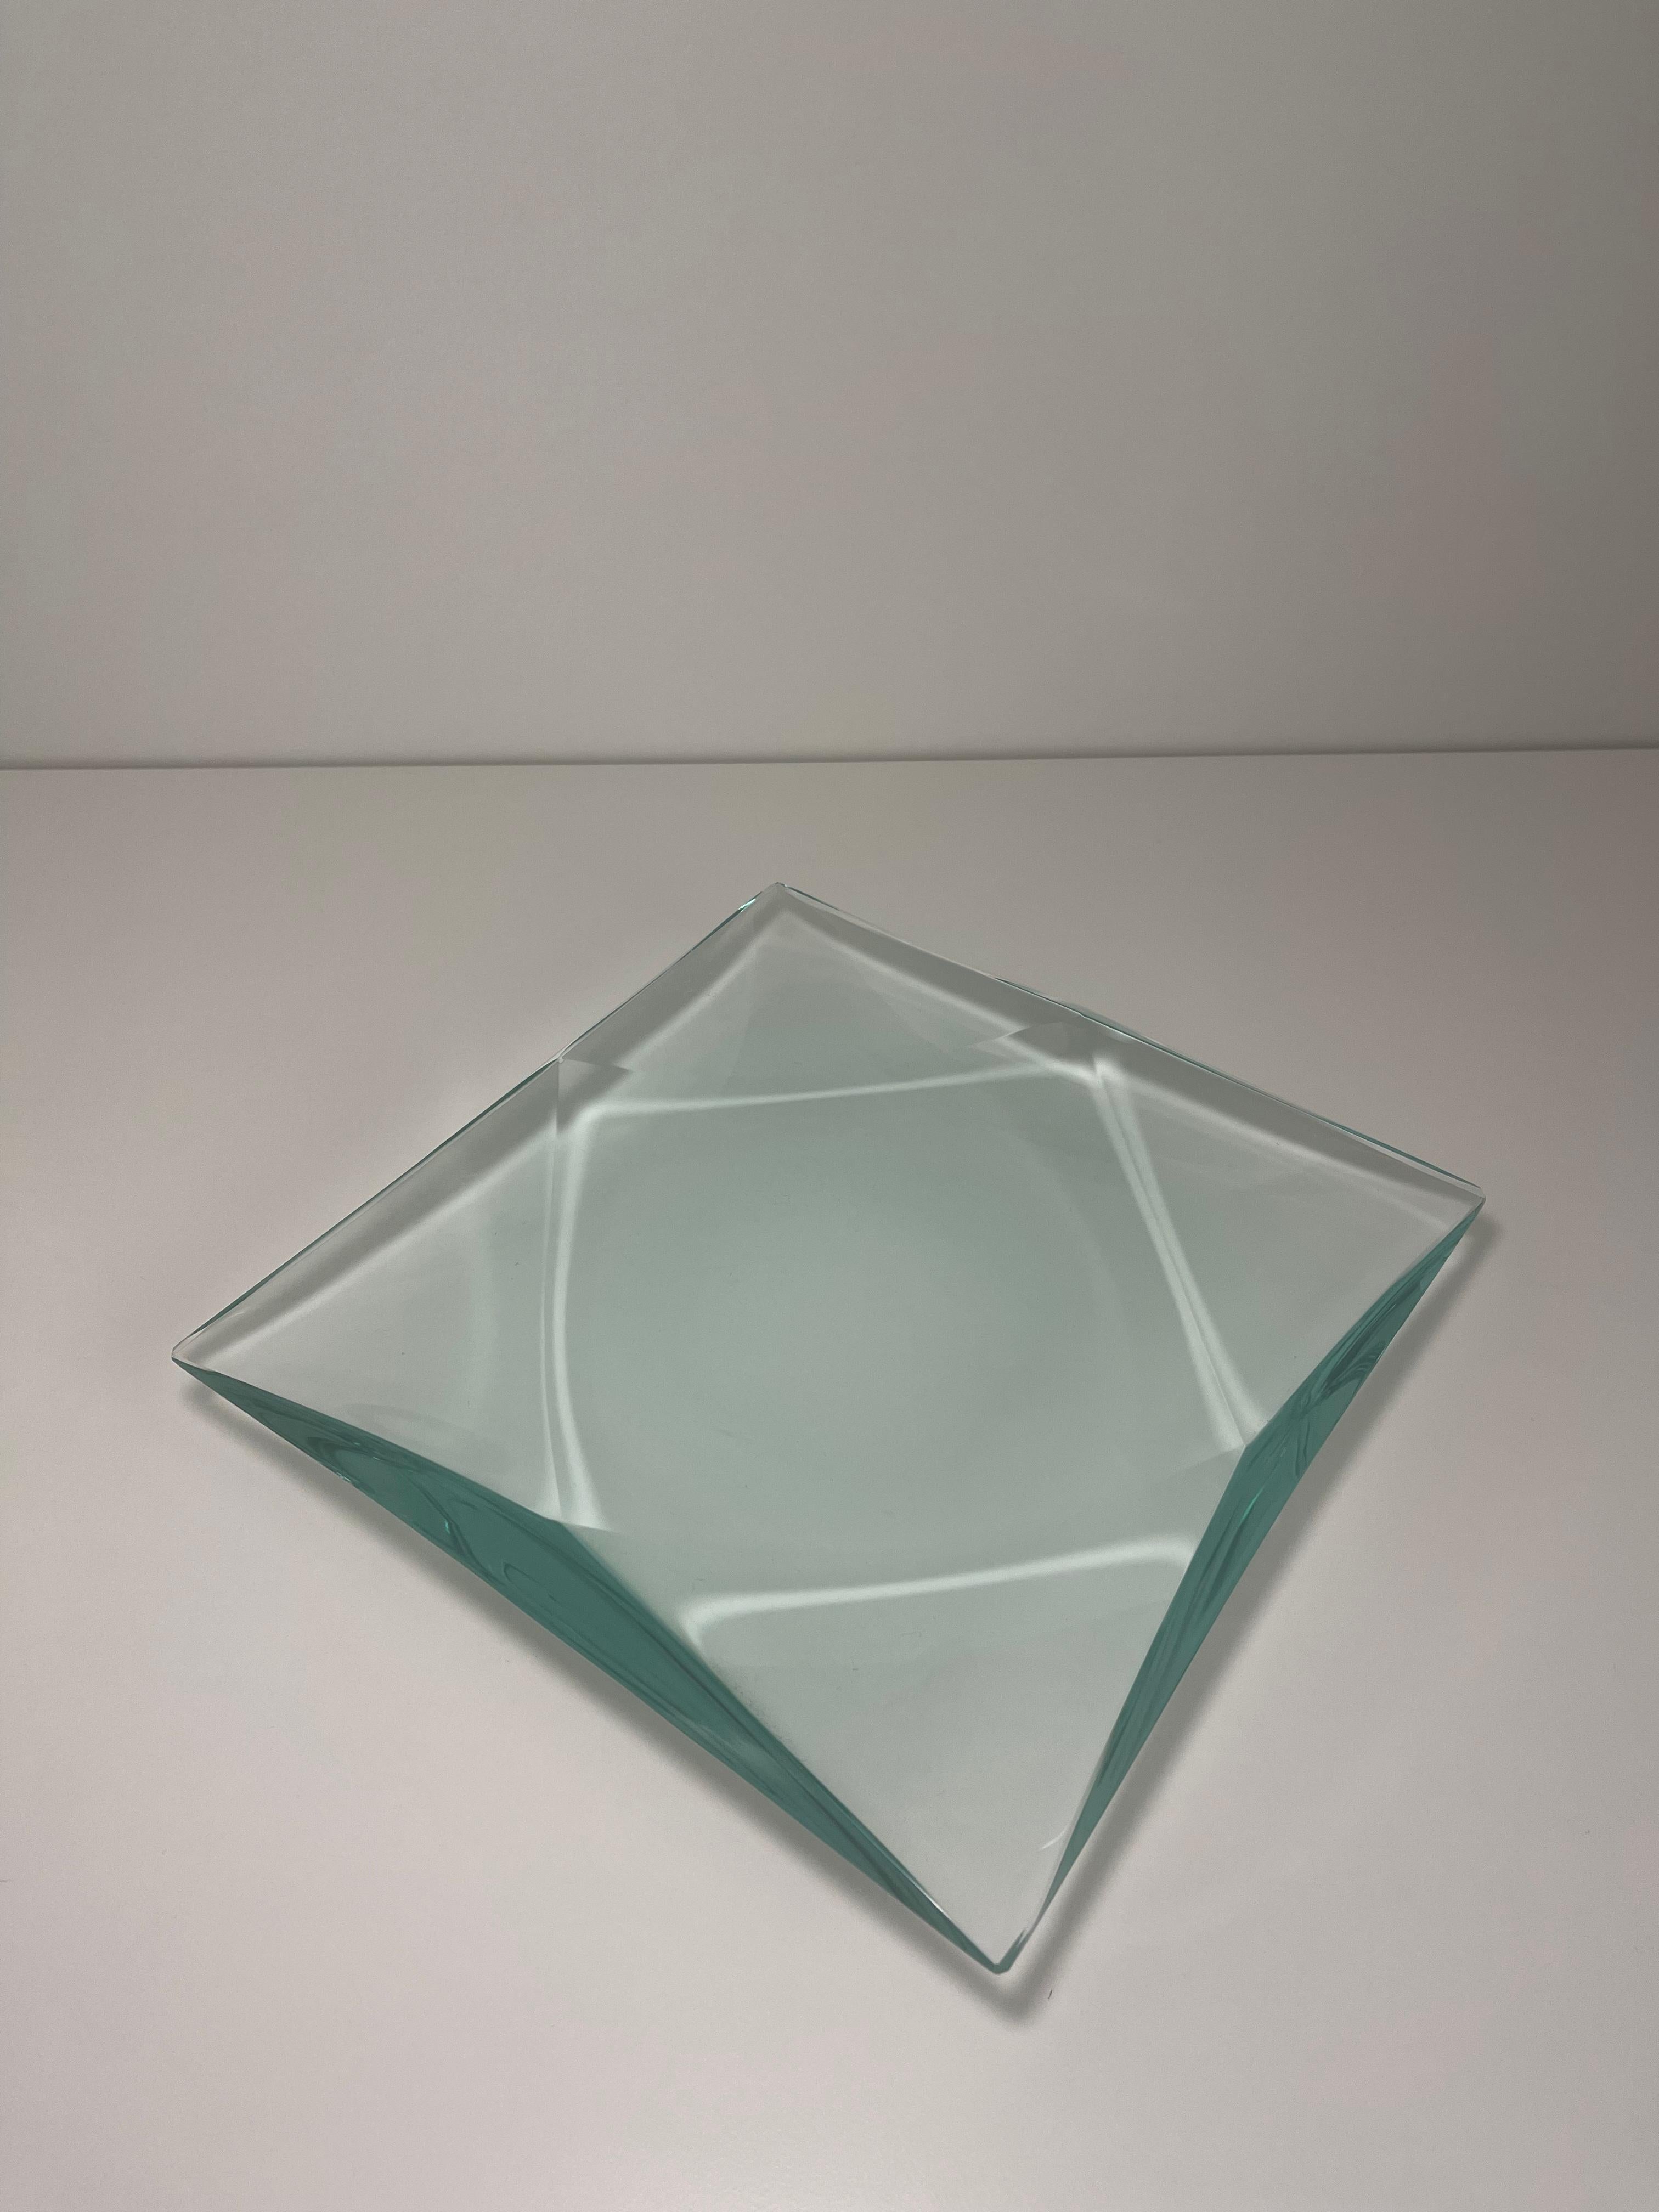 Modern Contemporary Decorative Handmade Crystal Bowl by Ghiró Studio For Sale